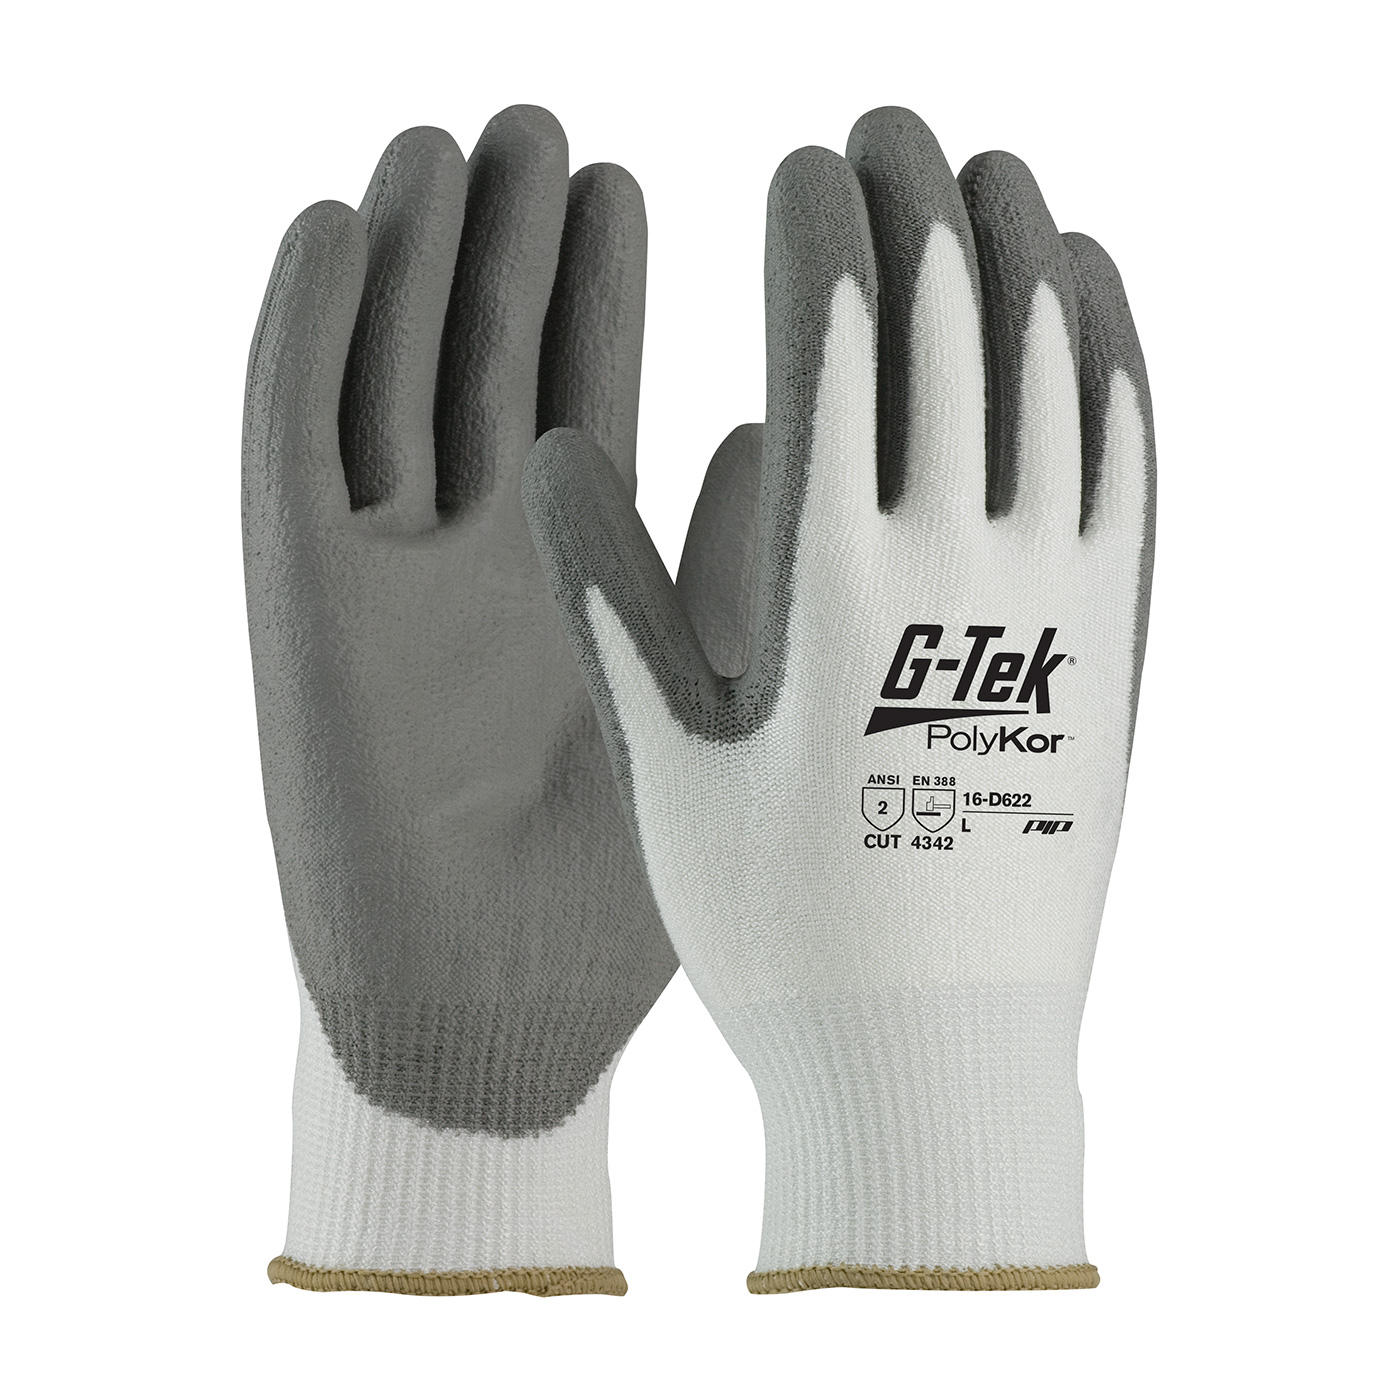 PIP 16-D622/XL G-Tek PolyKor Seamless Knit PolyKor Blended Glove with Polyurethane Coated Smooth Grip on Palm & Fingers - X-Large PID-16 D622 XL